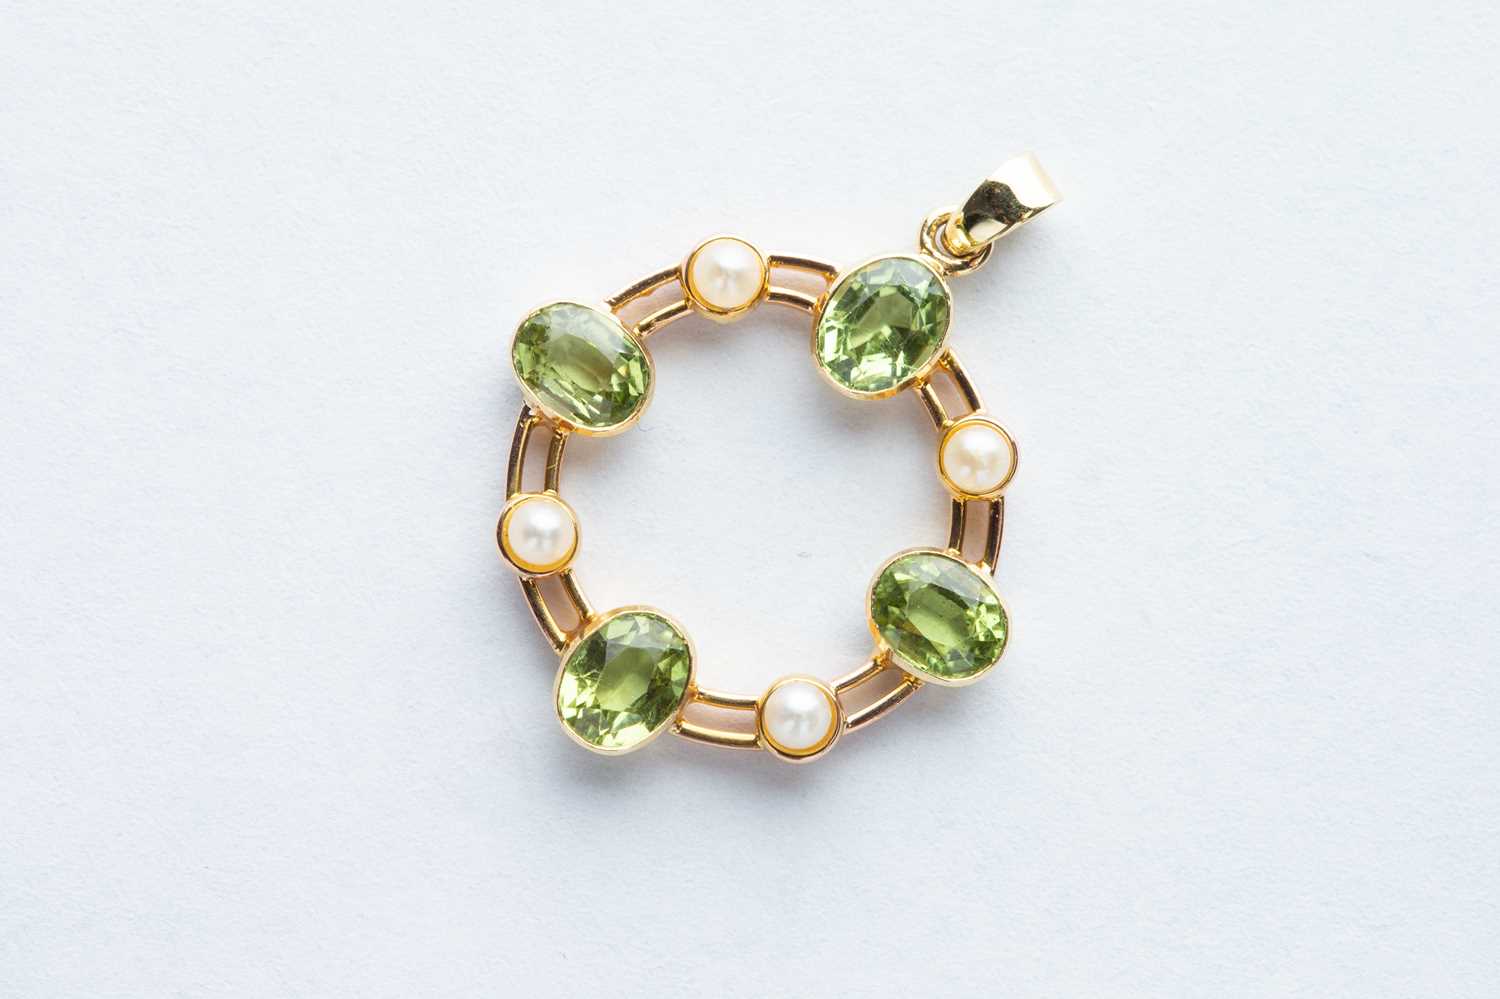 Lot 14 - A 18ct Yellow Gold Peridot & Cultured Seed Pearl Circle Pendant